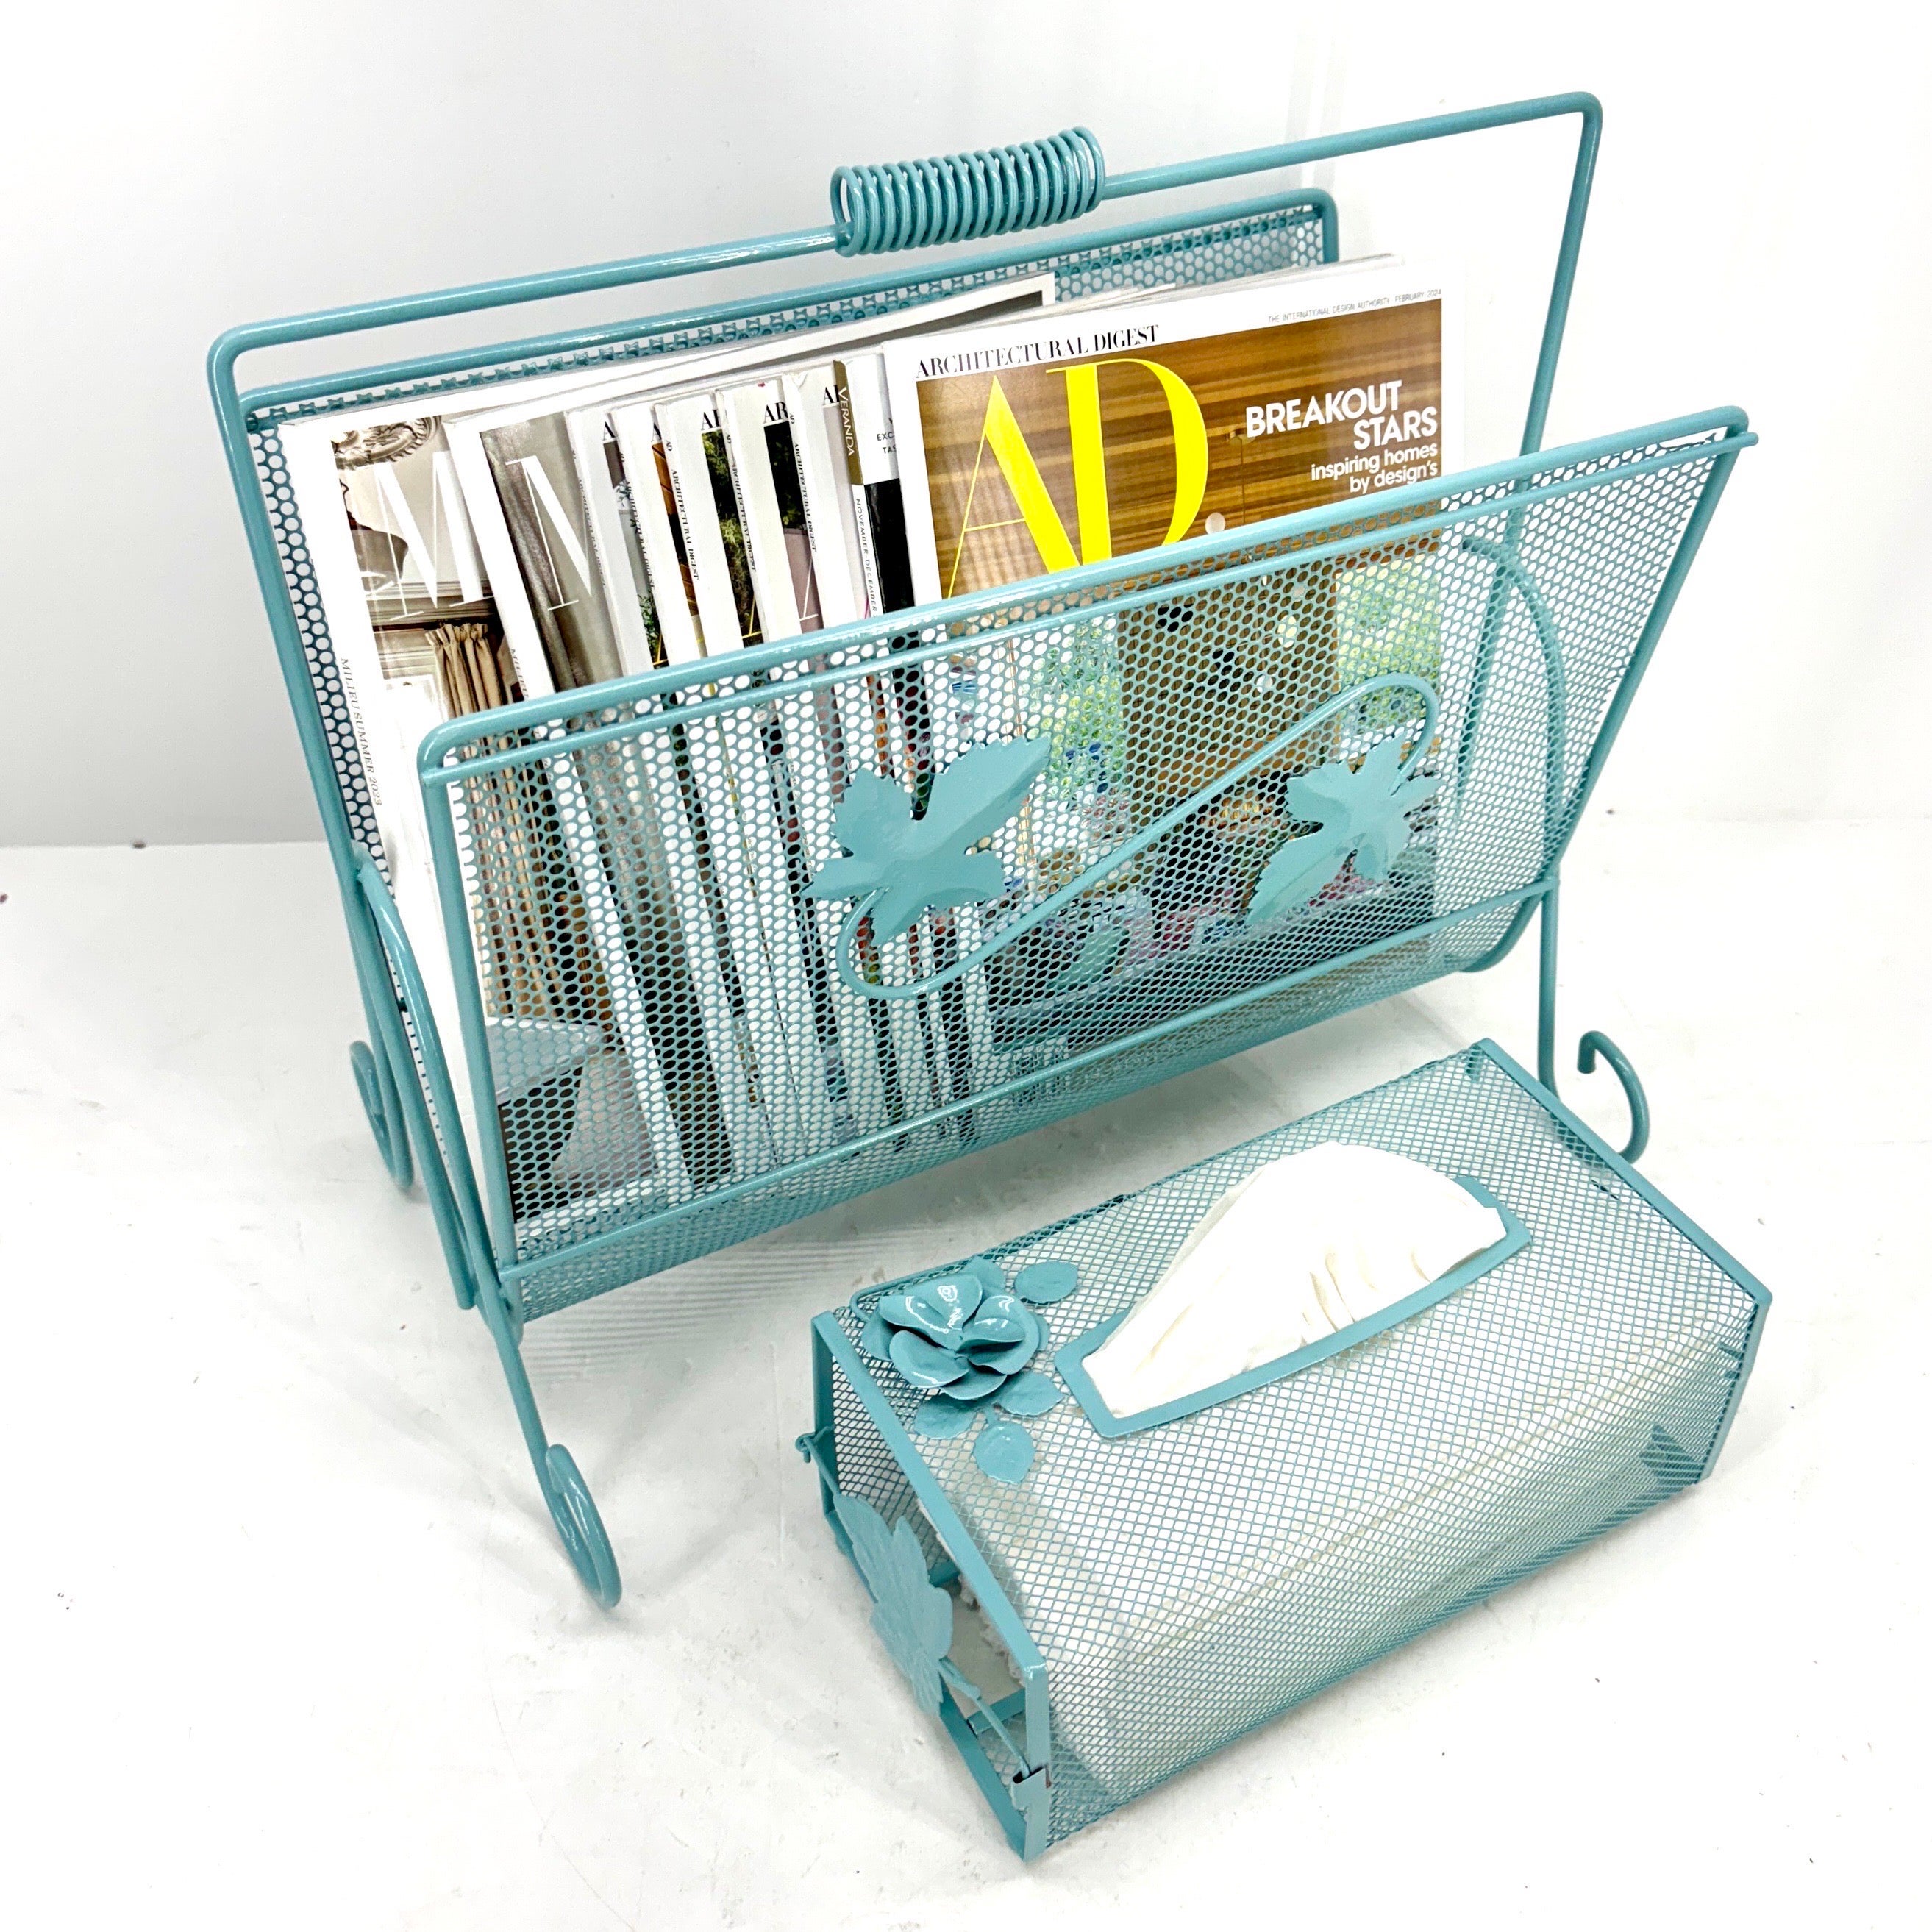 Powder-Coated Aqua Blue Floral Magazine Rack Tissue Holder Set, 1950's

Charming vintage set from the 1950's. This mid-century modern freshly powder-coated pair would be a wonderful addition to any powder room or guest room in any formal or informal